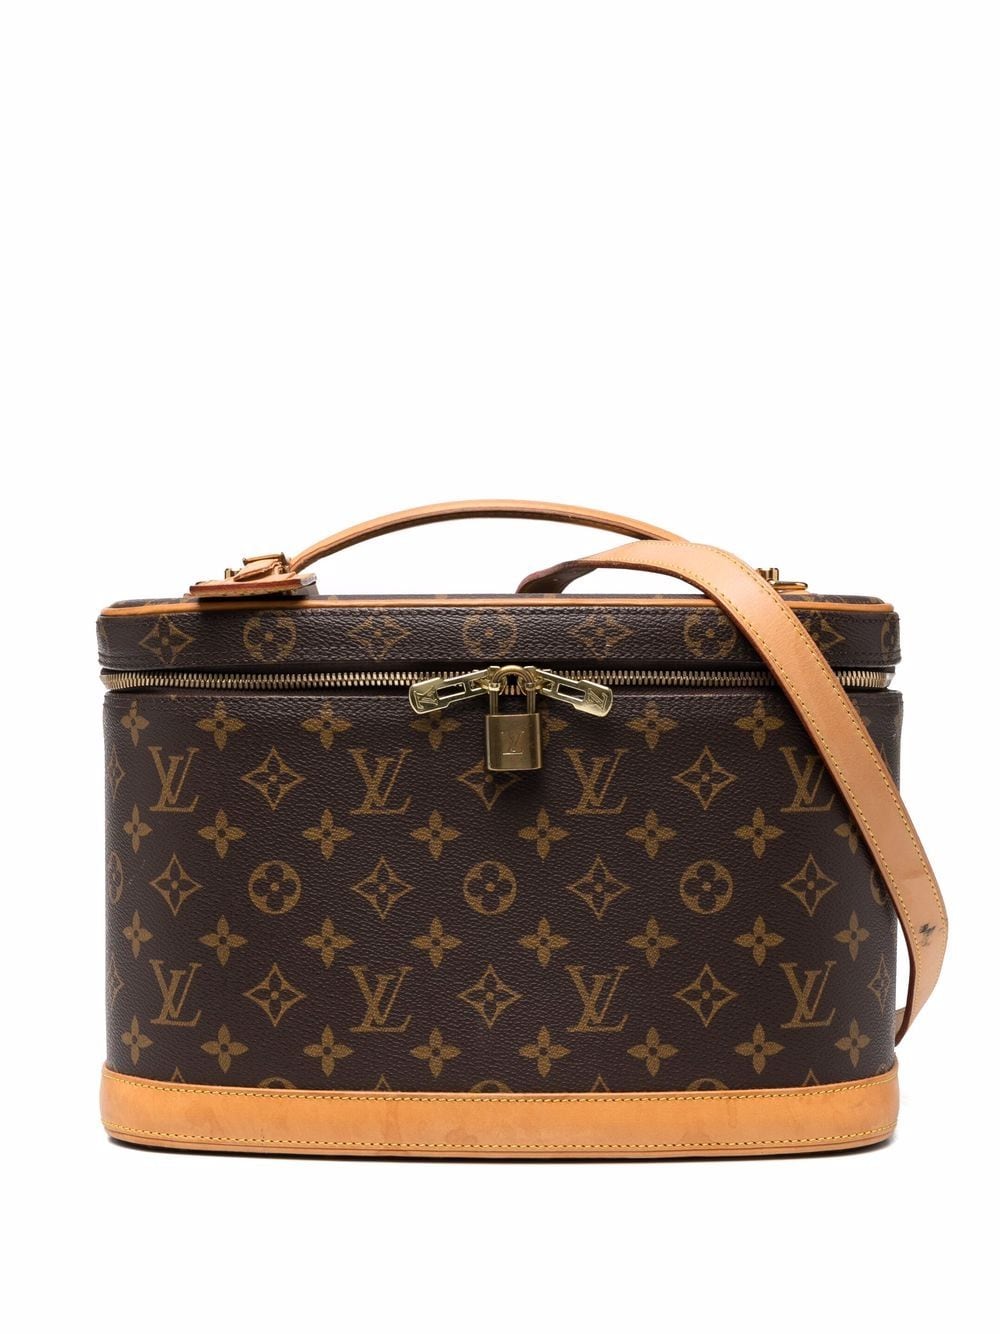 Rent Louis Vuitton Jewelry  Handbags at only 55month  Switch